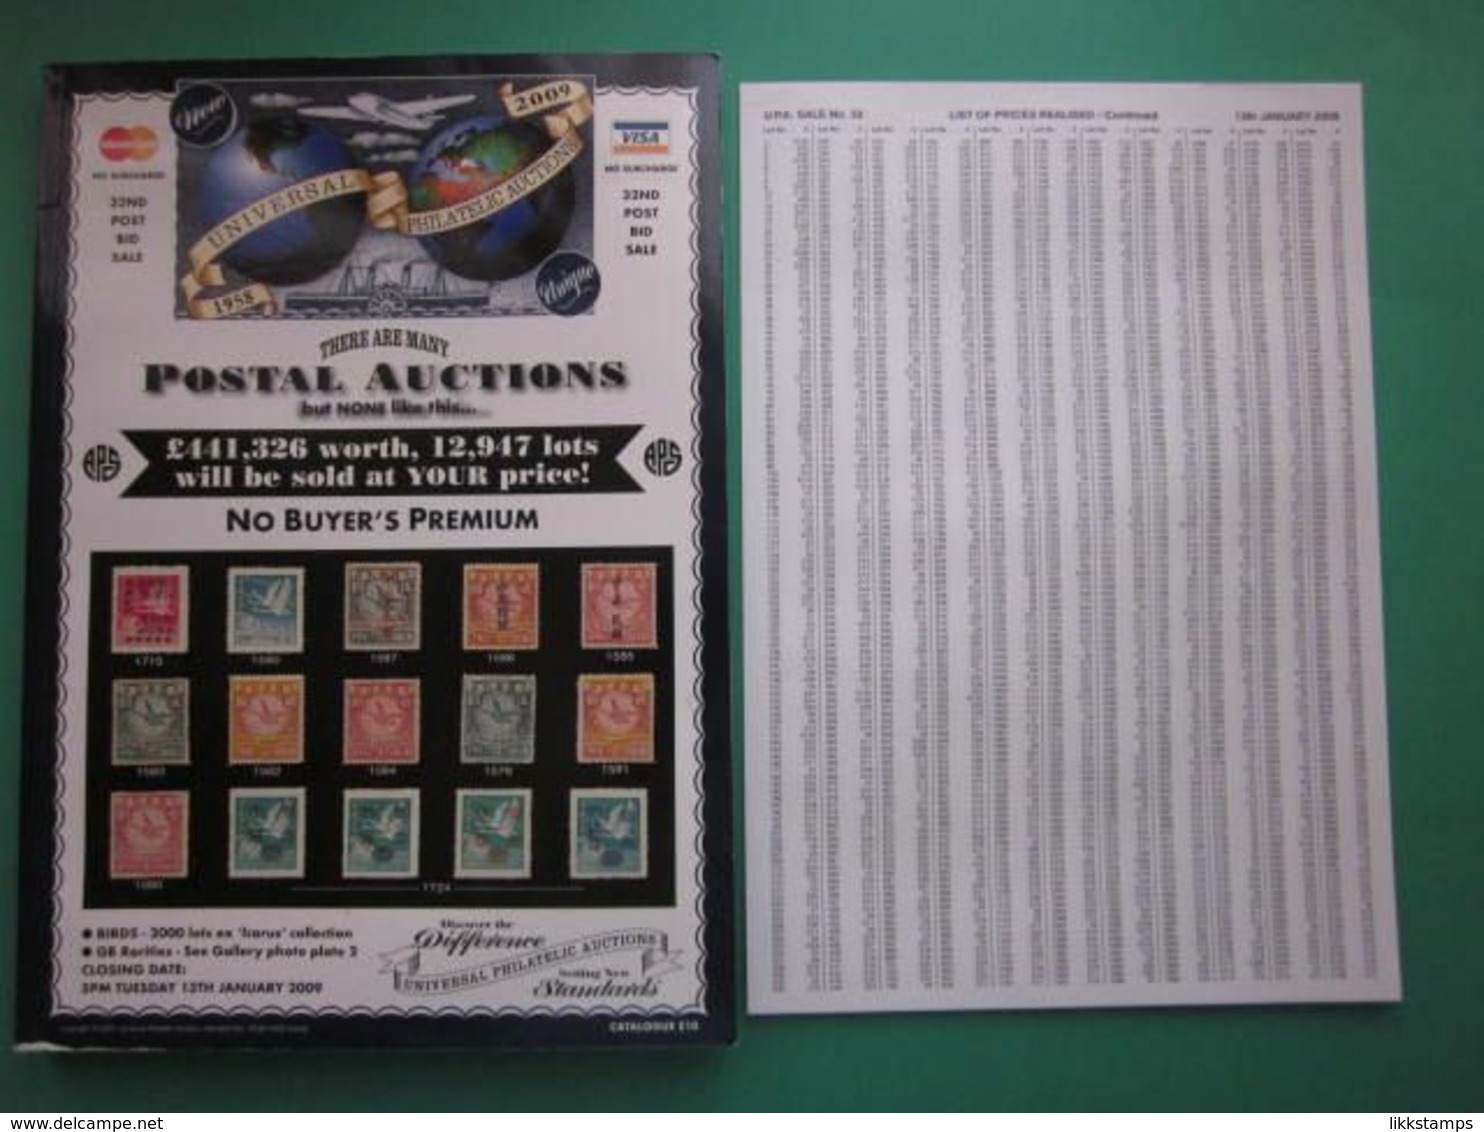 UNIVERSAL PHILATELIC AUCTIONS CATALOGUE FOR SALE No.32 TUESDAY 13th JANUARY 2009 #L0188 - Catalogues For Auction Houses